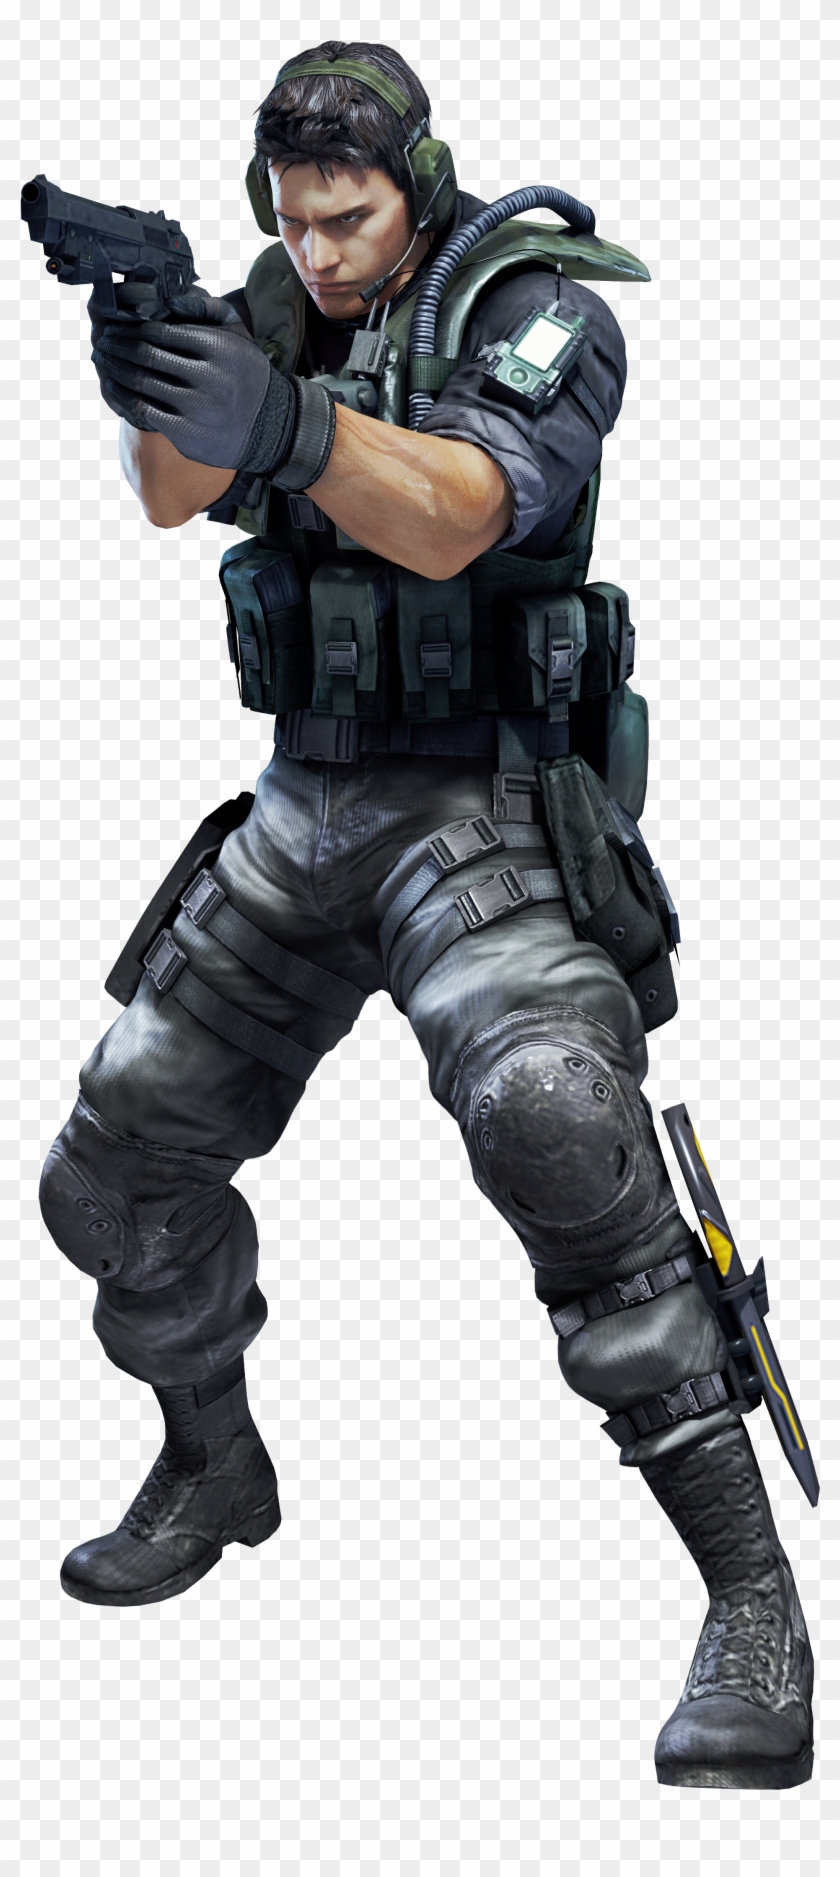 Wallhaven-359471 Video Game Characters, Fantasy Characters, - Chris Redfield Resident Evil Revelations Clipart #2878555